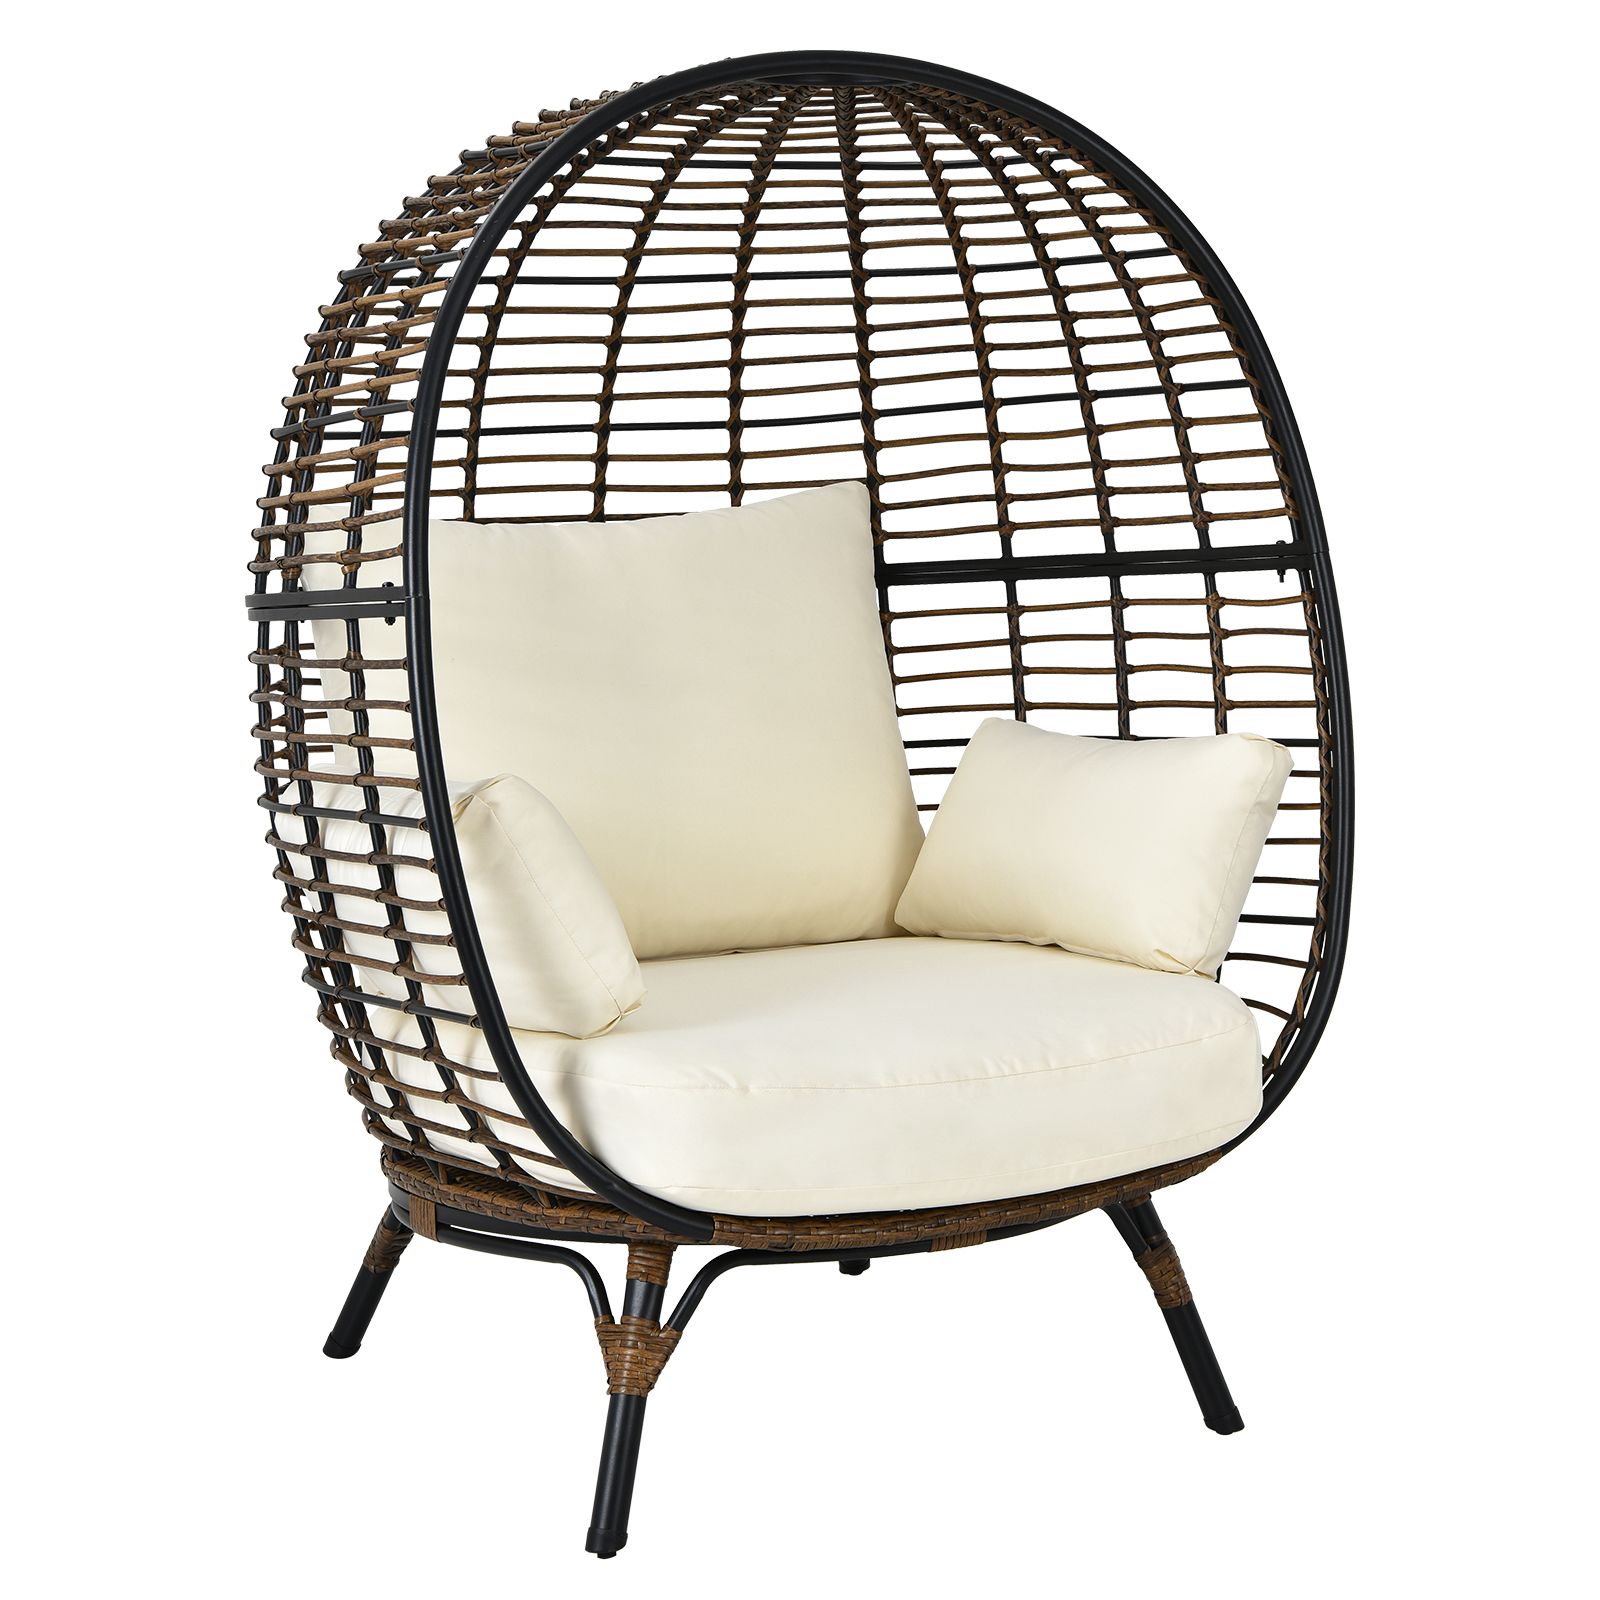 Patiojoy Rattan Egg Chair Lounge Chair Wide Seat w/Cushion Suitable for Indoor & Outdoor Beige | Walmart (US)